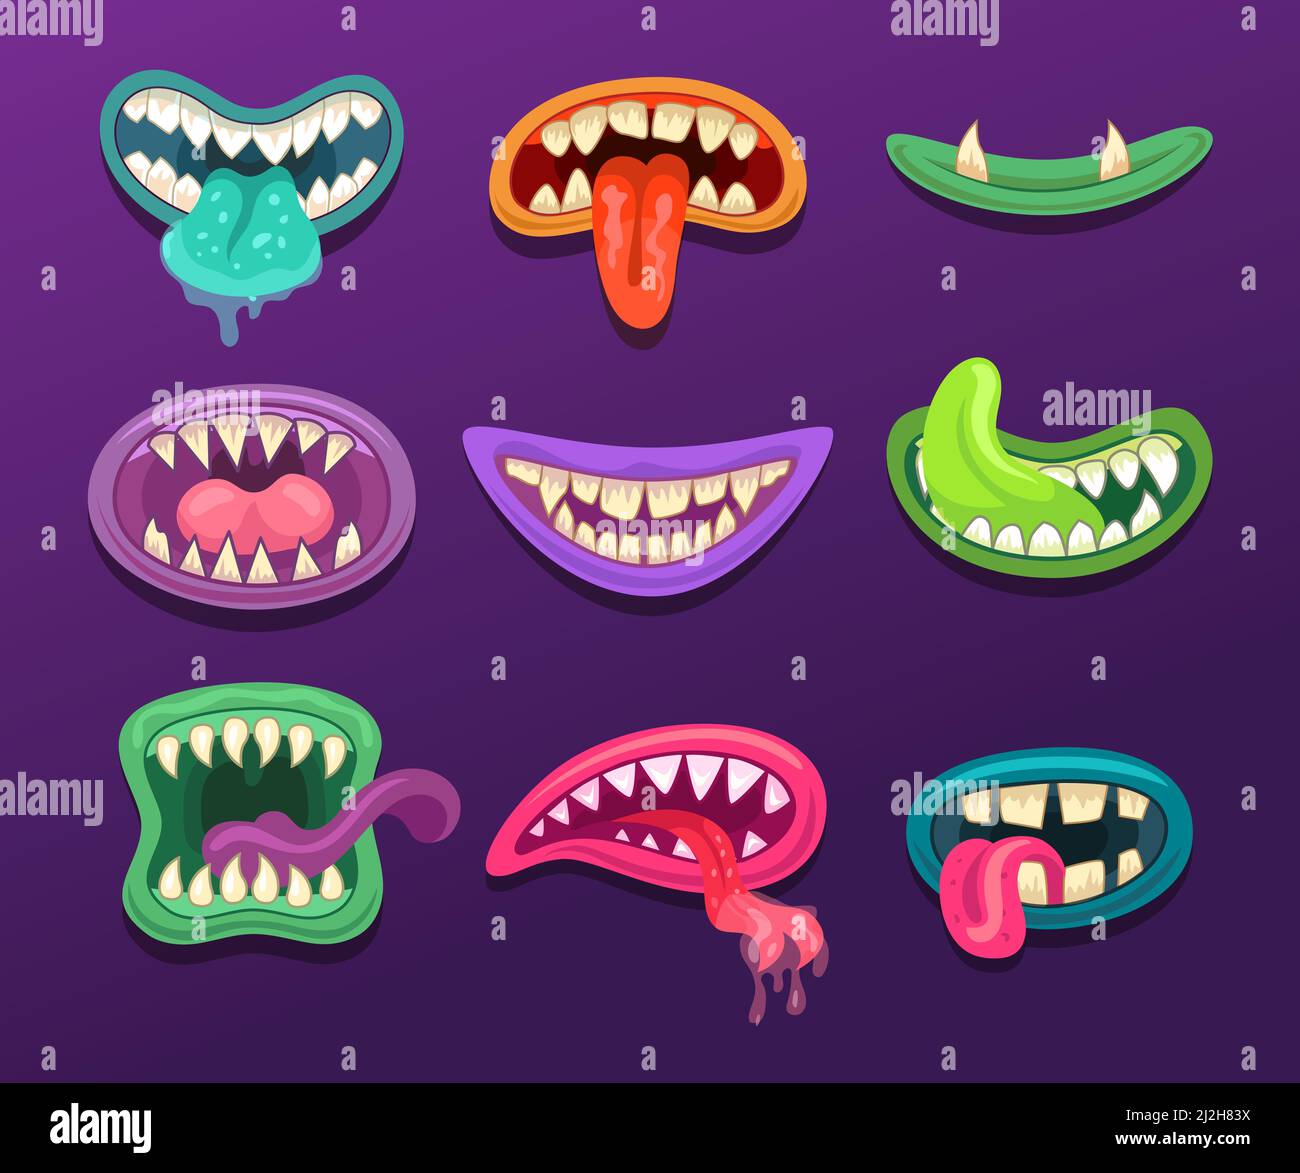 Monster mouths illustrations set in cartoon style. Cute creature mouths with tongue and teeth and dripping saliva. Halloween caricature monster collec Stock Vector